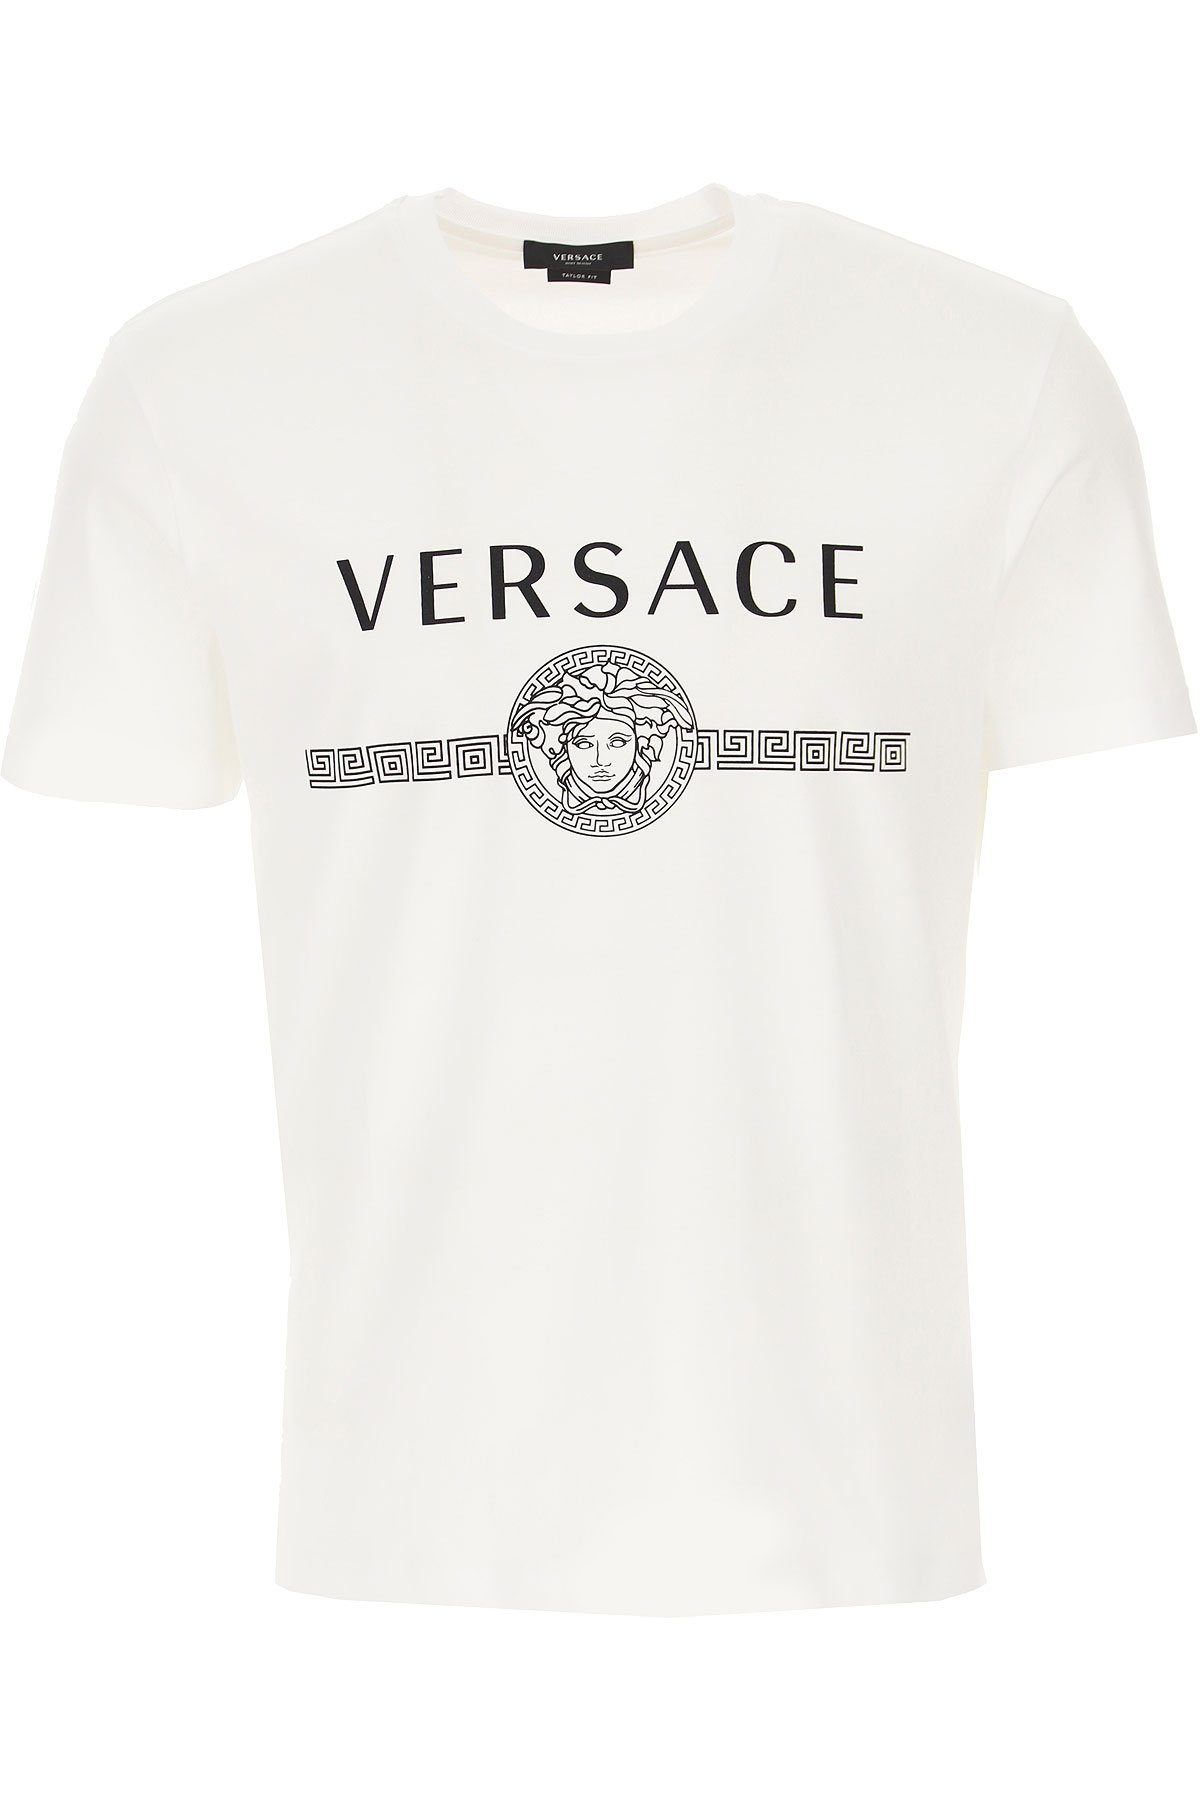 Mens Clothing Versace, Style code: a87573-a228806-a1001